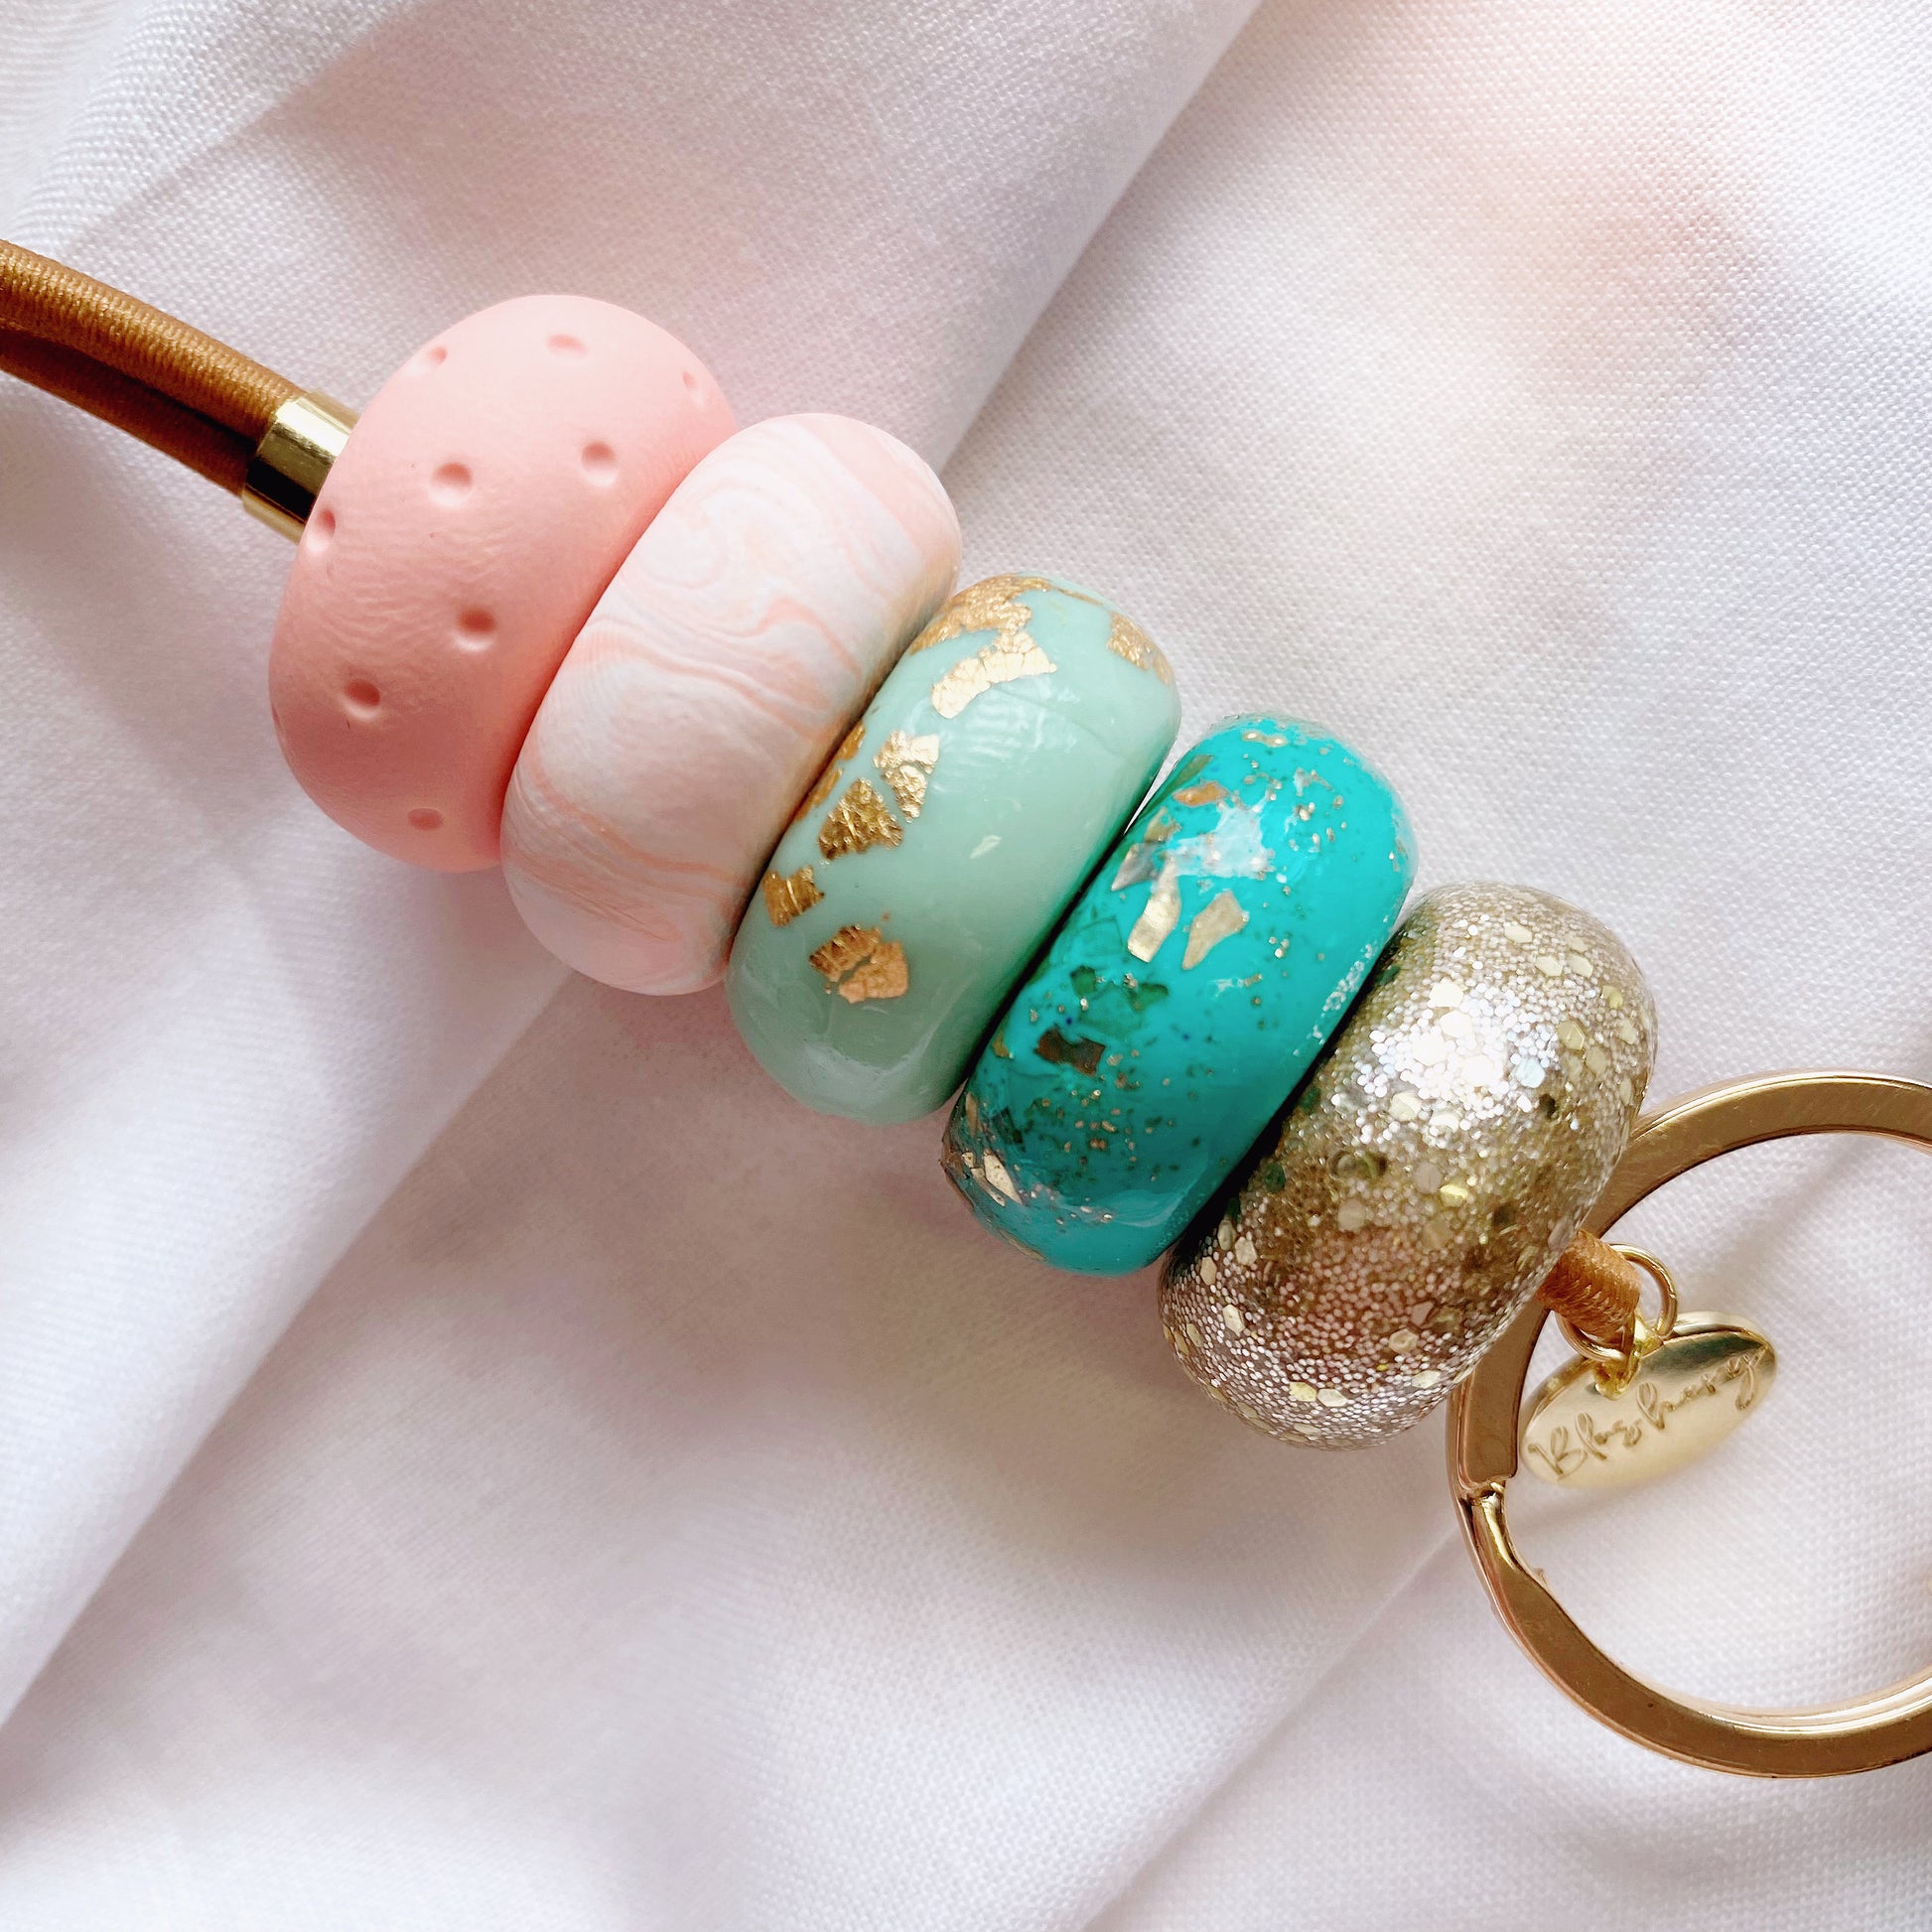 up close to the peach and teal and mint polymer clay beads, with gold glitter and marble print